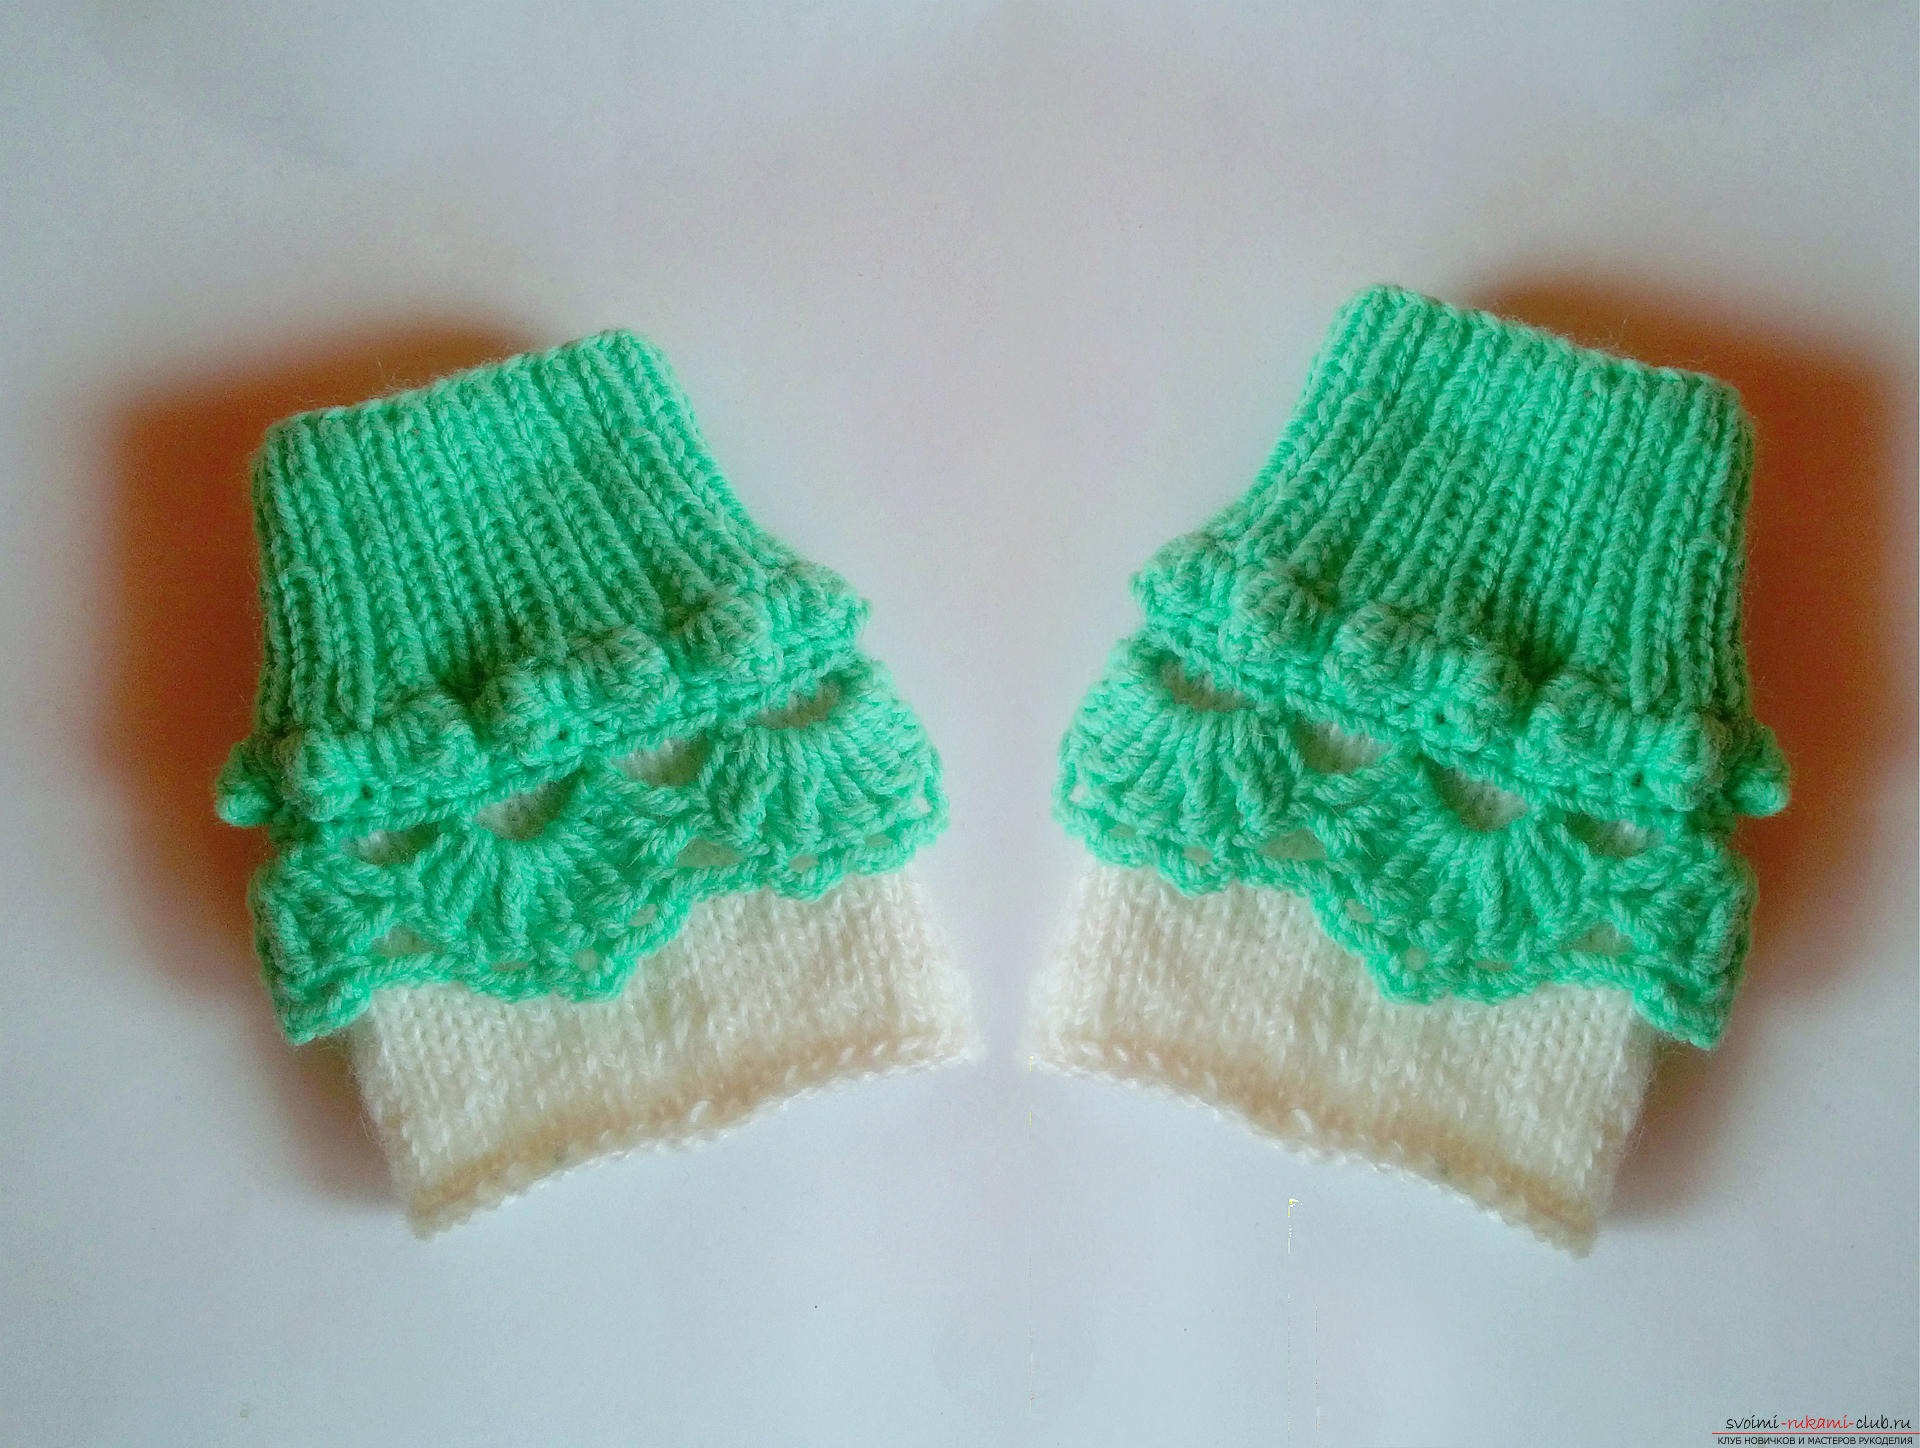 This master class on knitting for beginners will tell you how to learn to knit mittens .. Photo # 1